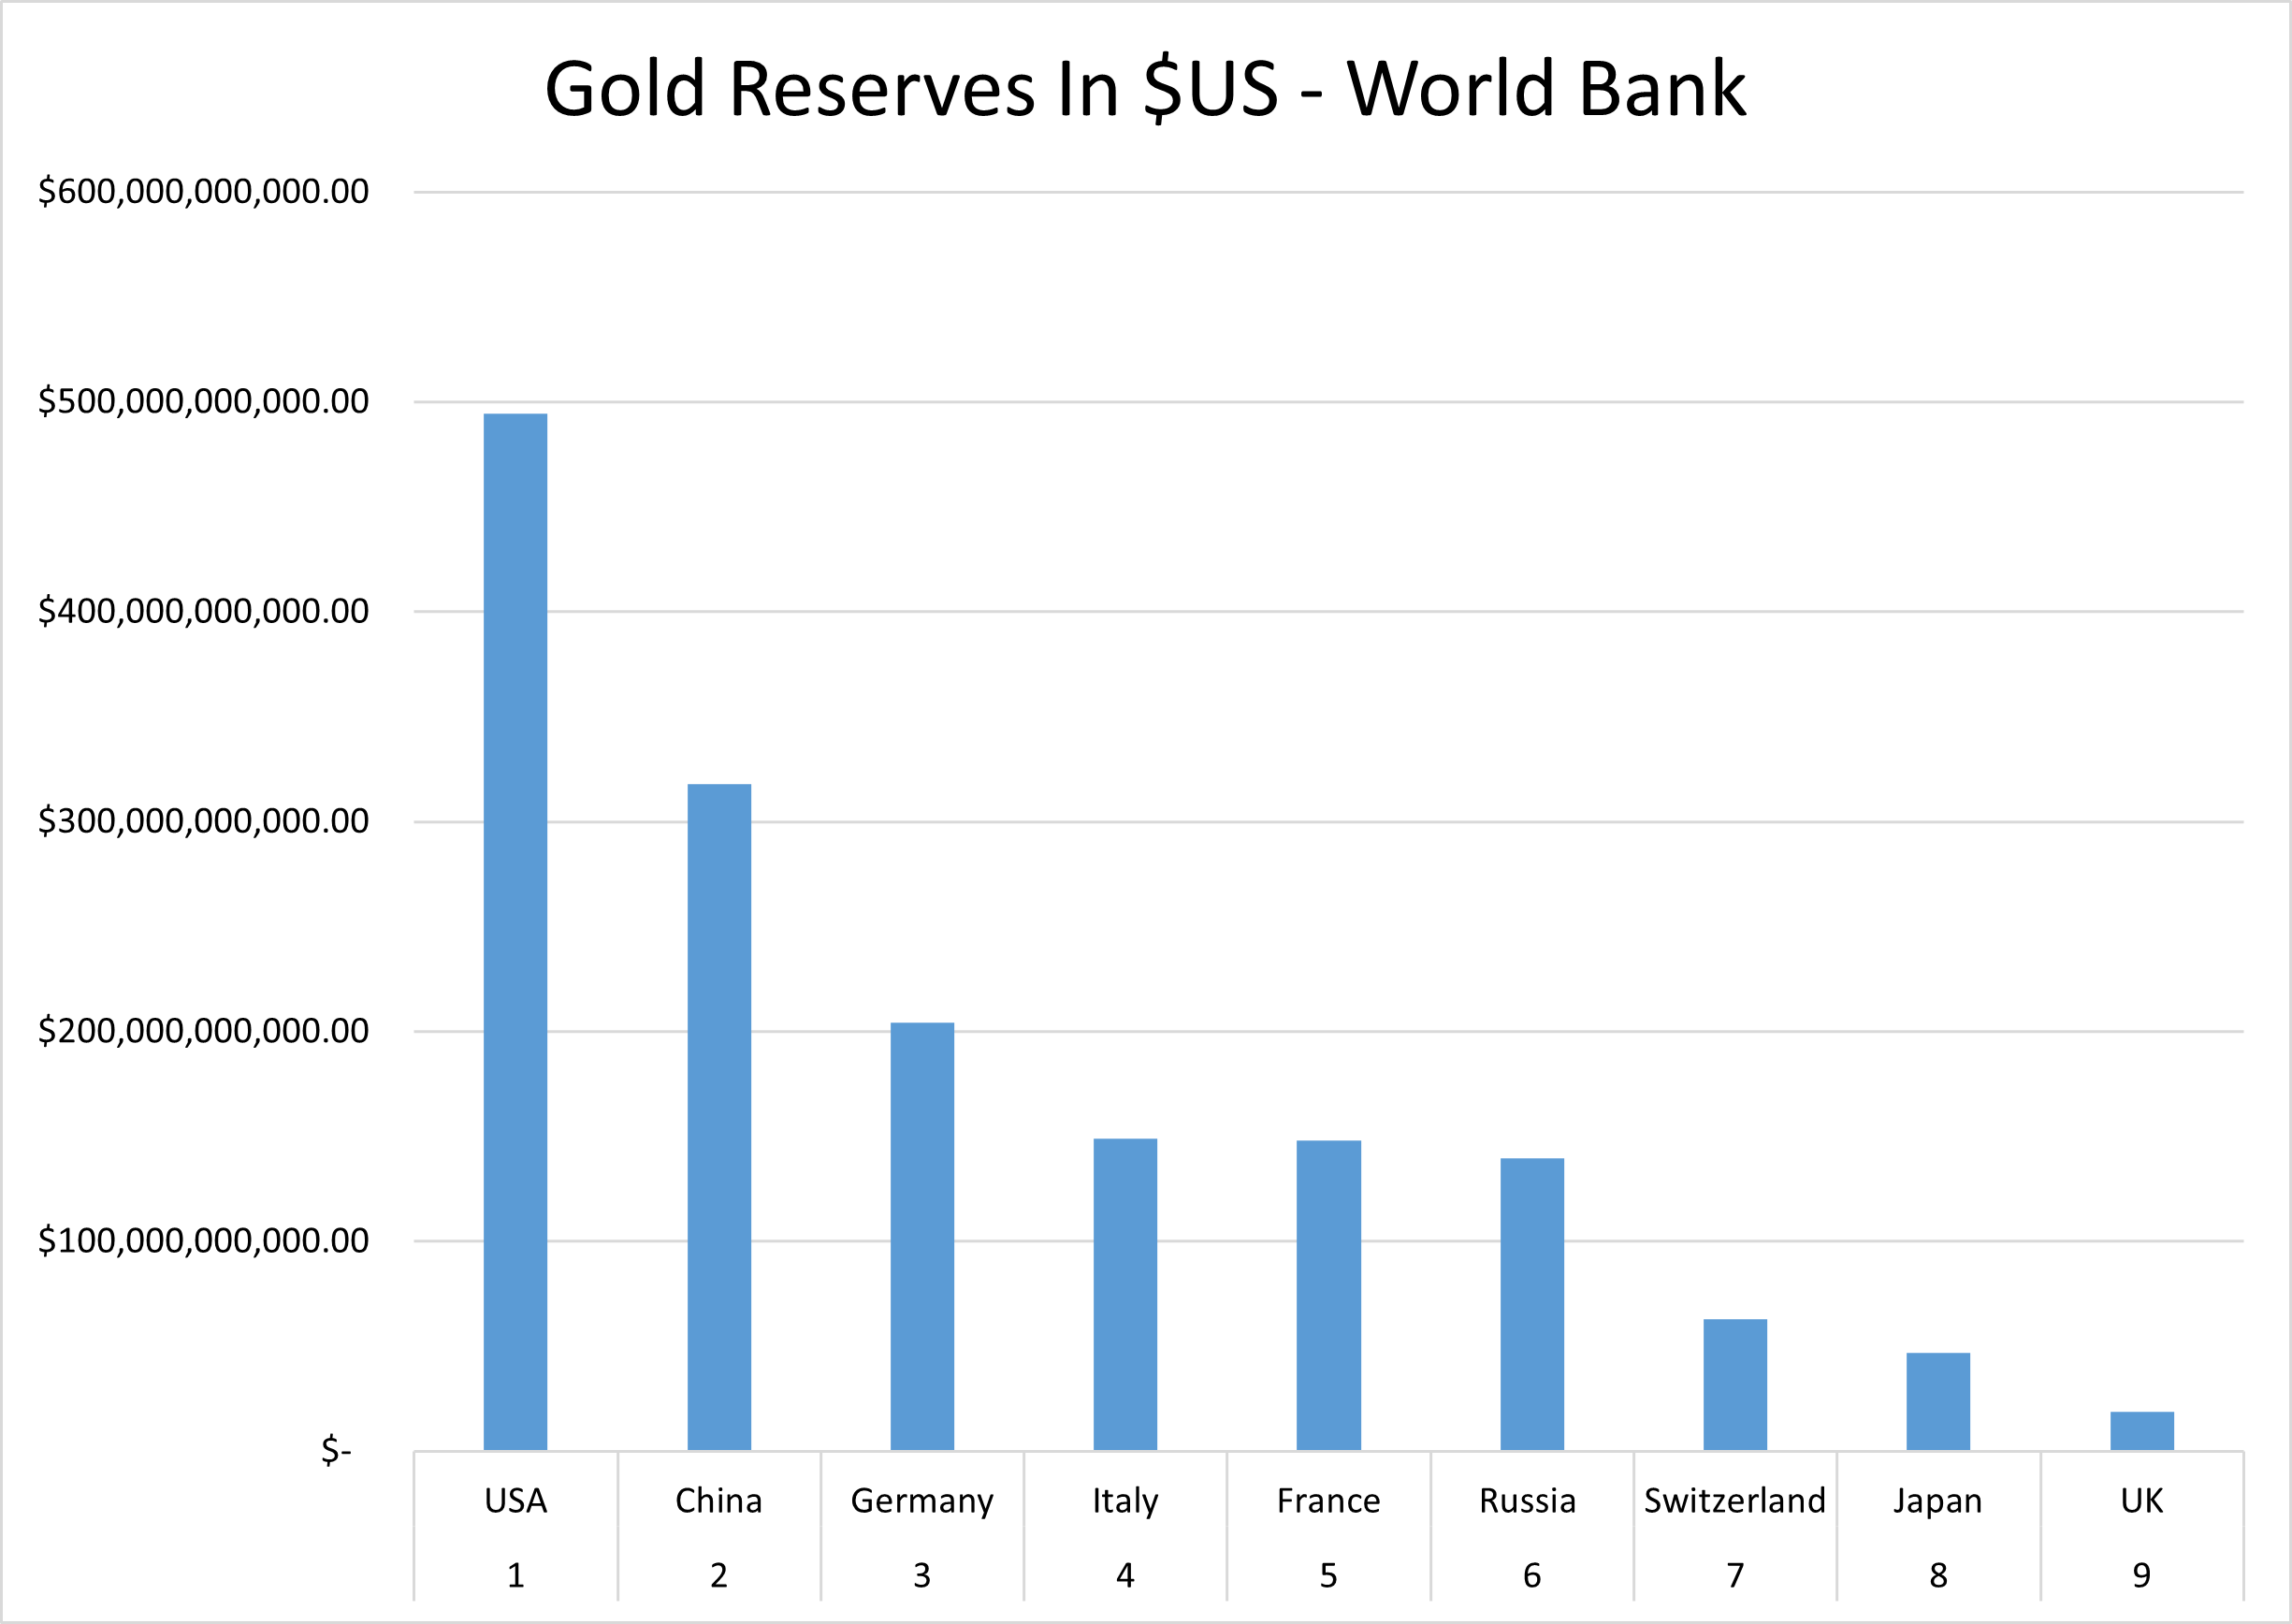 Chart depicting gold reserves in US dollars per country